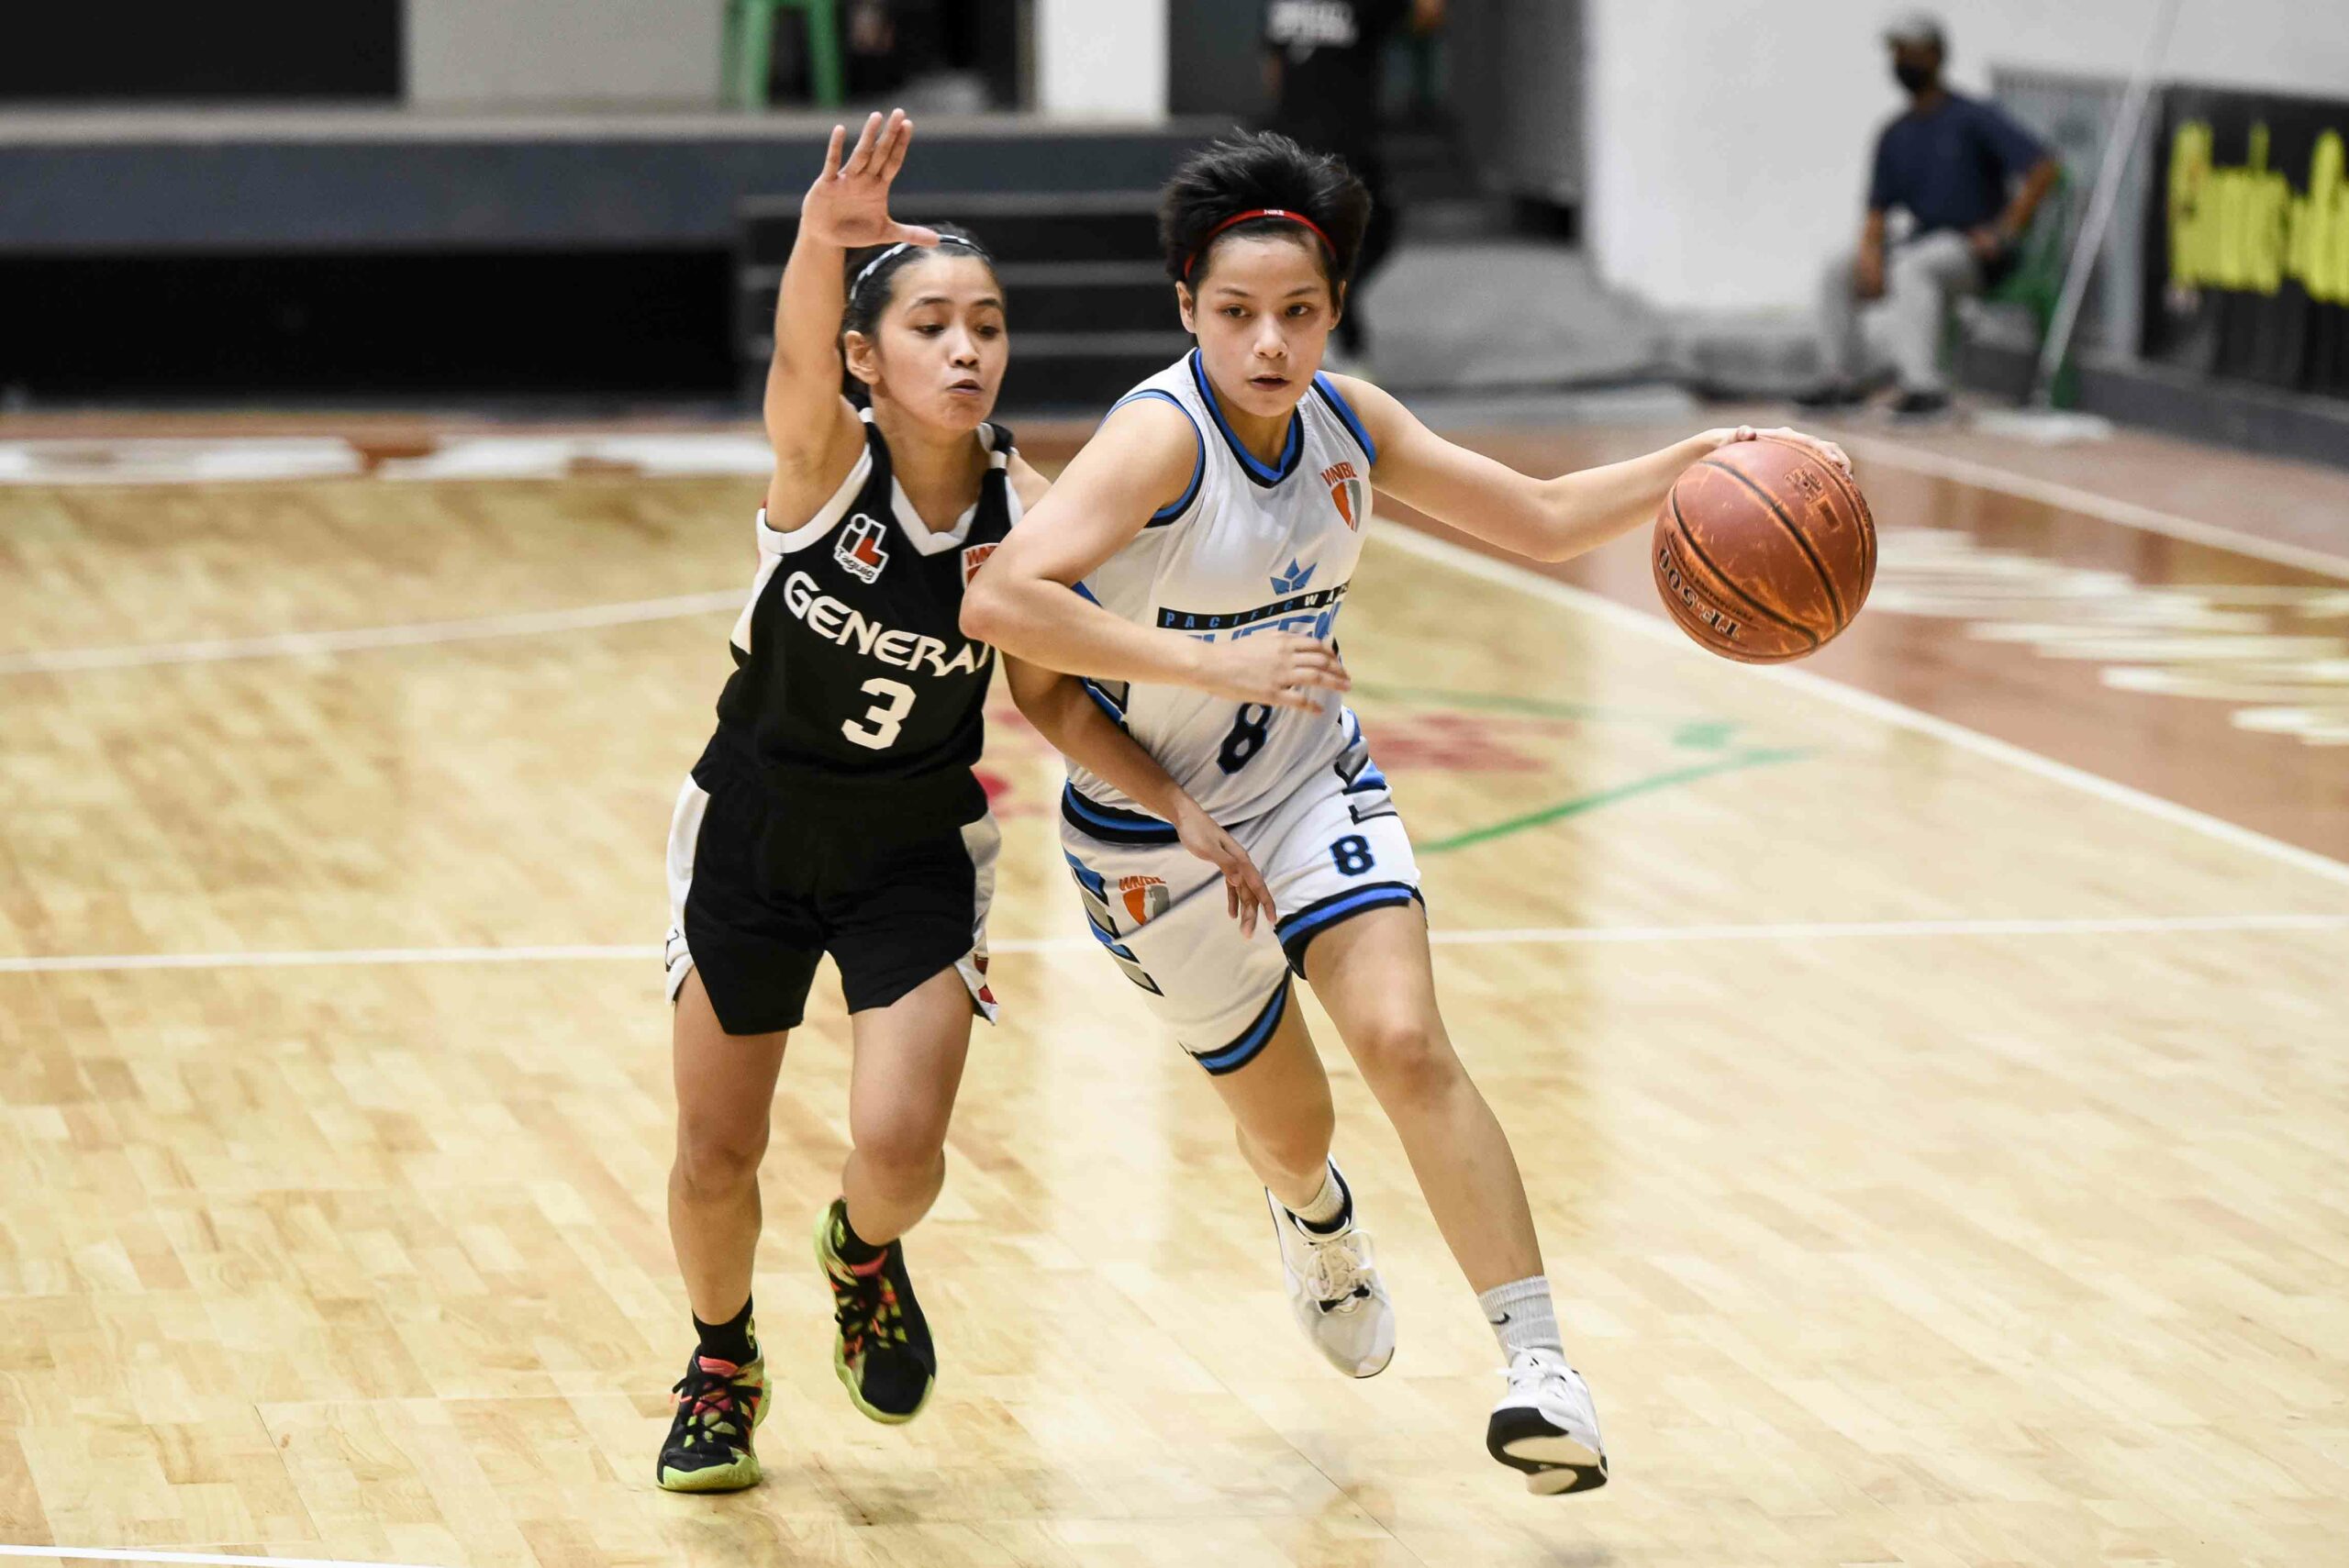 2021-Pia-WNBL-Pacific-Water-vs-Taguig-Jollina-Go-Pacific-Water-scaled Taguig survives war vs Pacific Water, nabs third win in WNBL Basketball NBL News  - philippine sports news